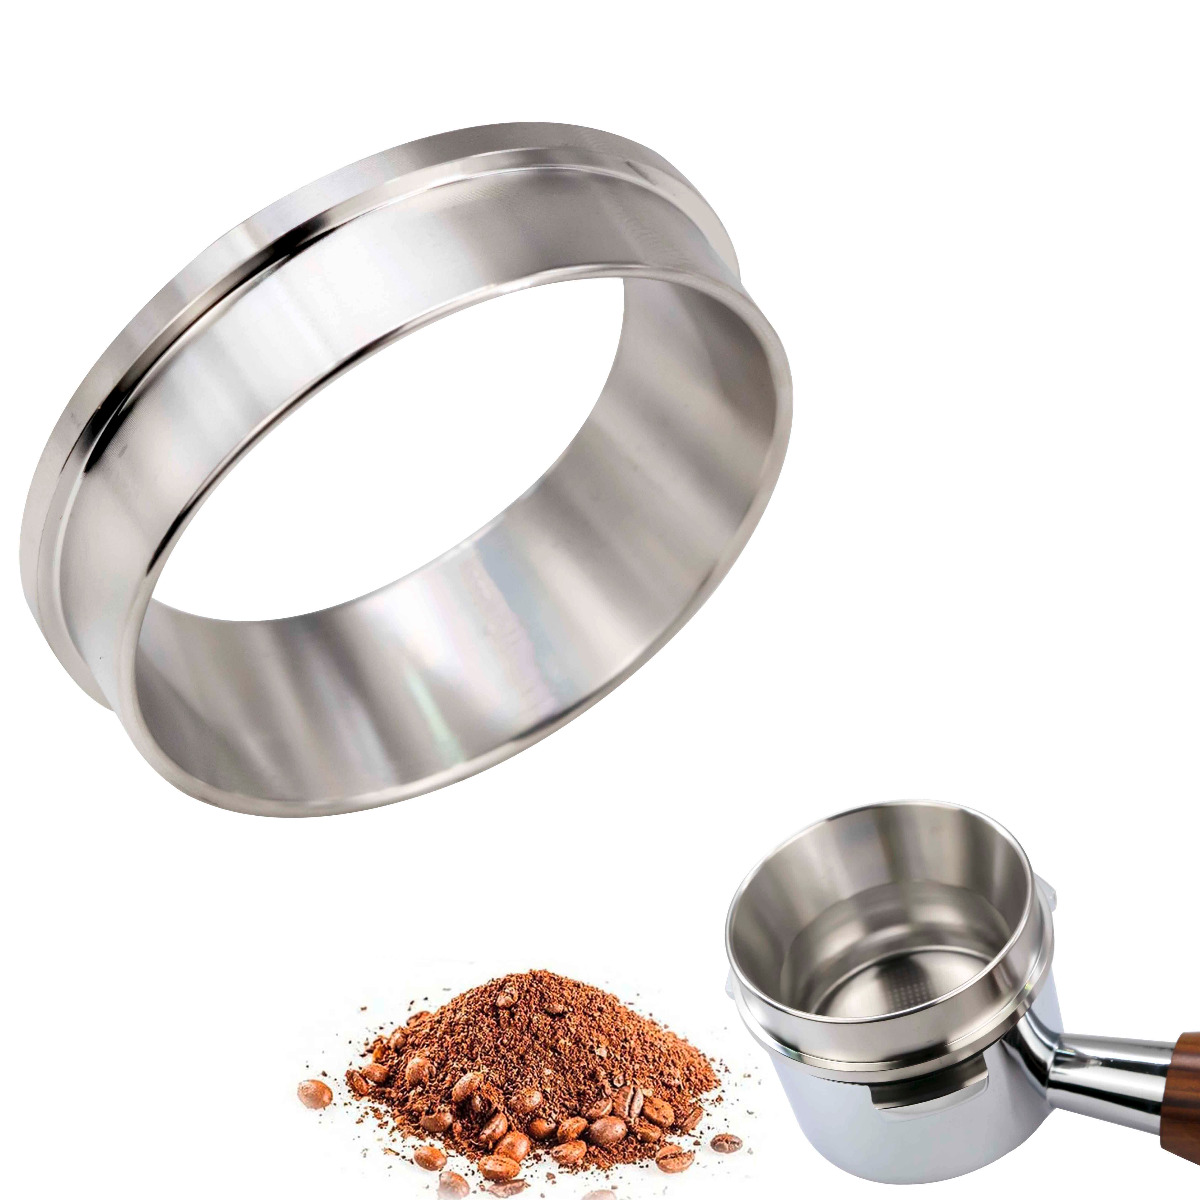 Coffee funnel ring stainless steel 53mm 54mm